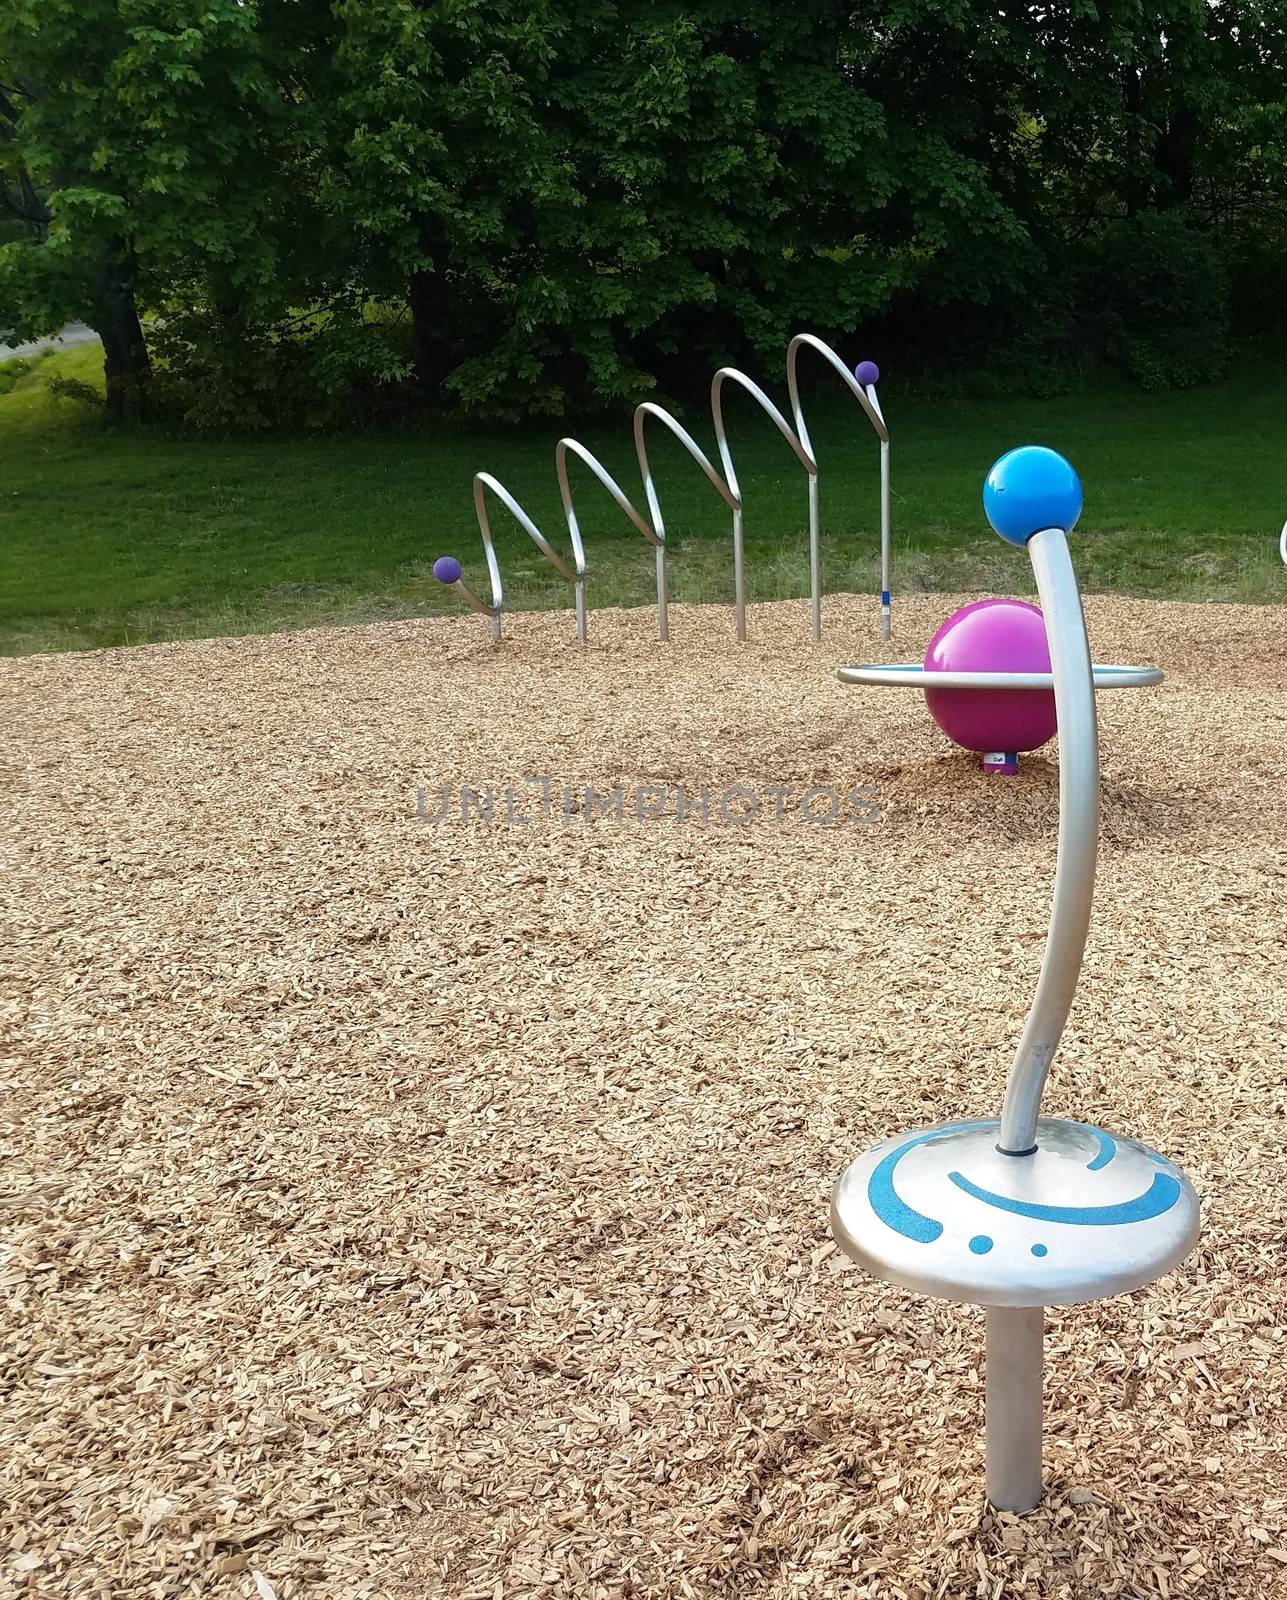 play structure at playground with metal spinner by stockphotofan1